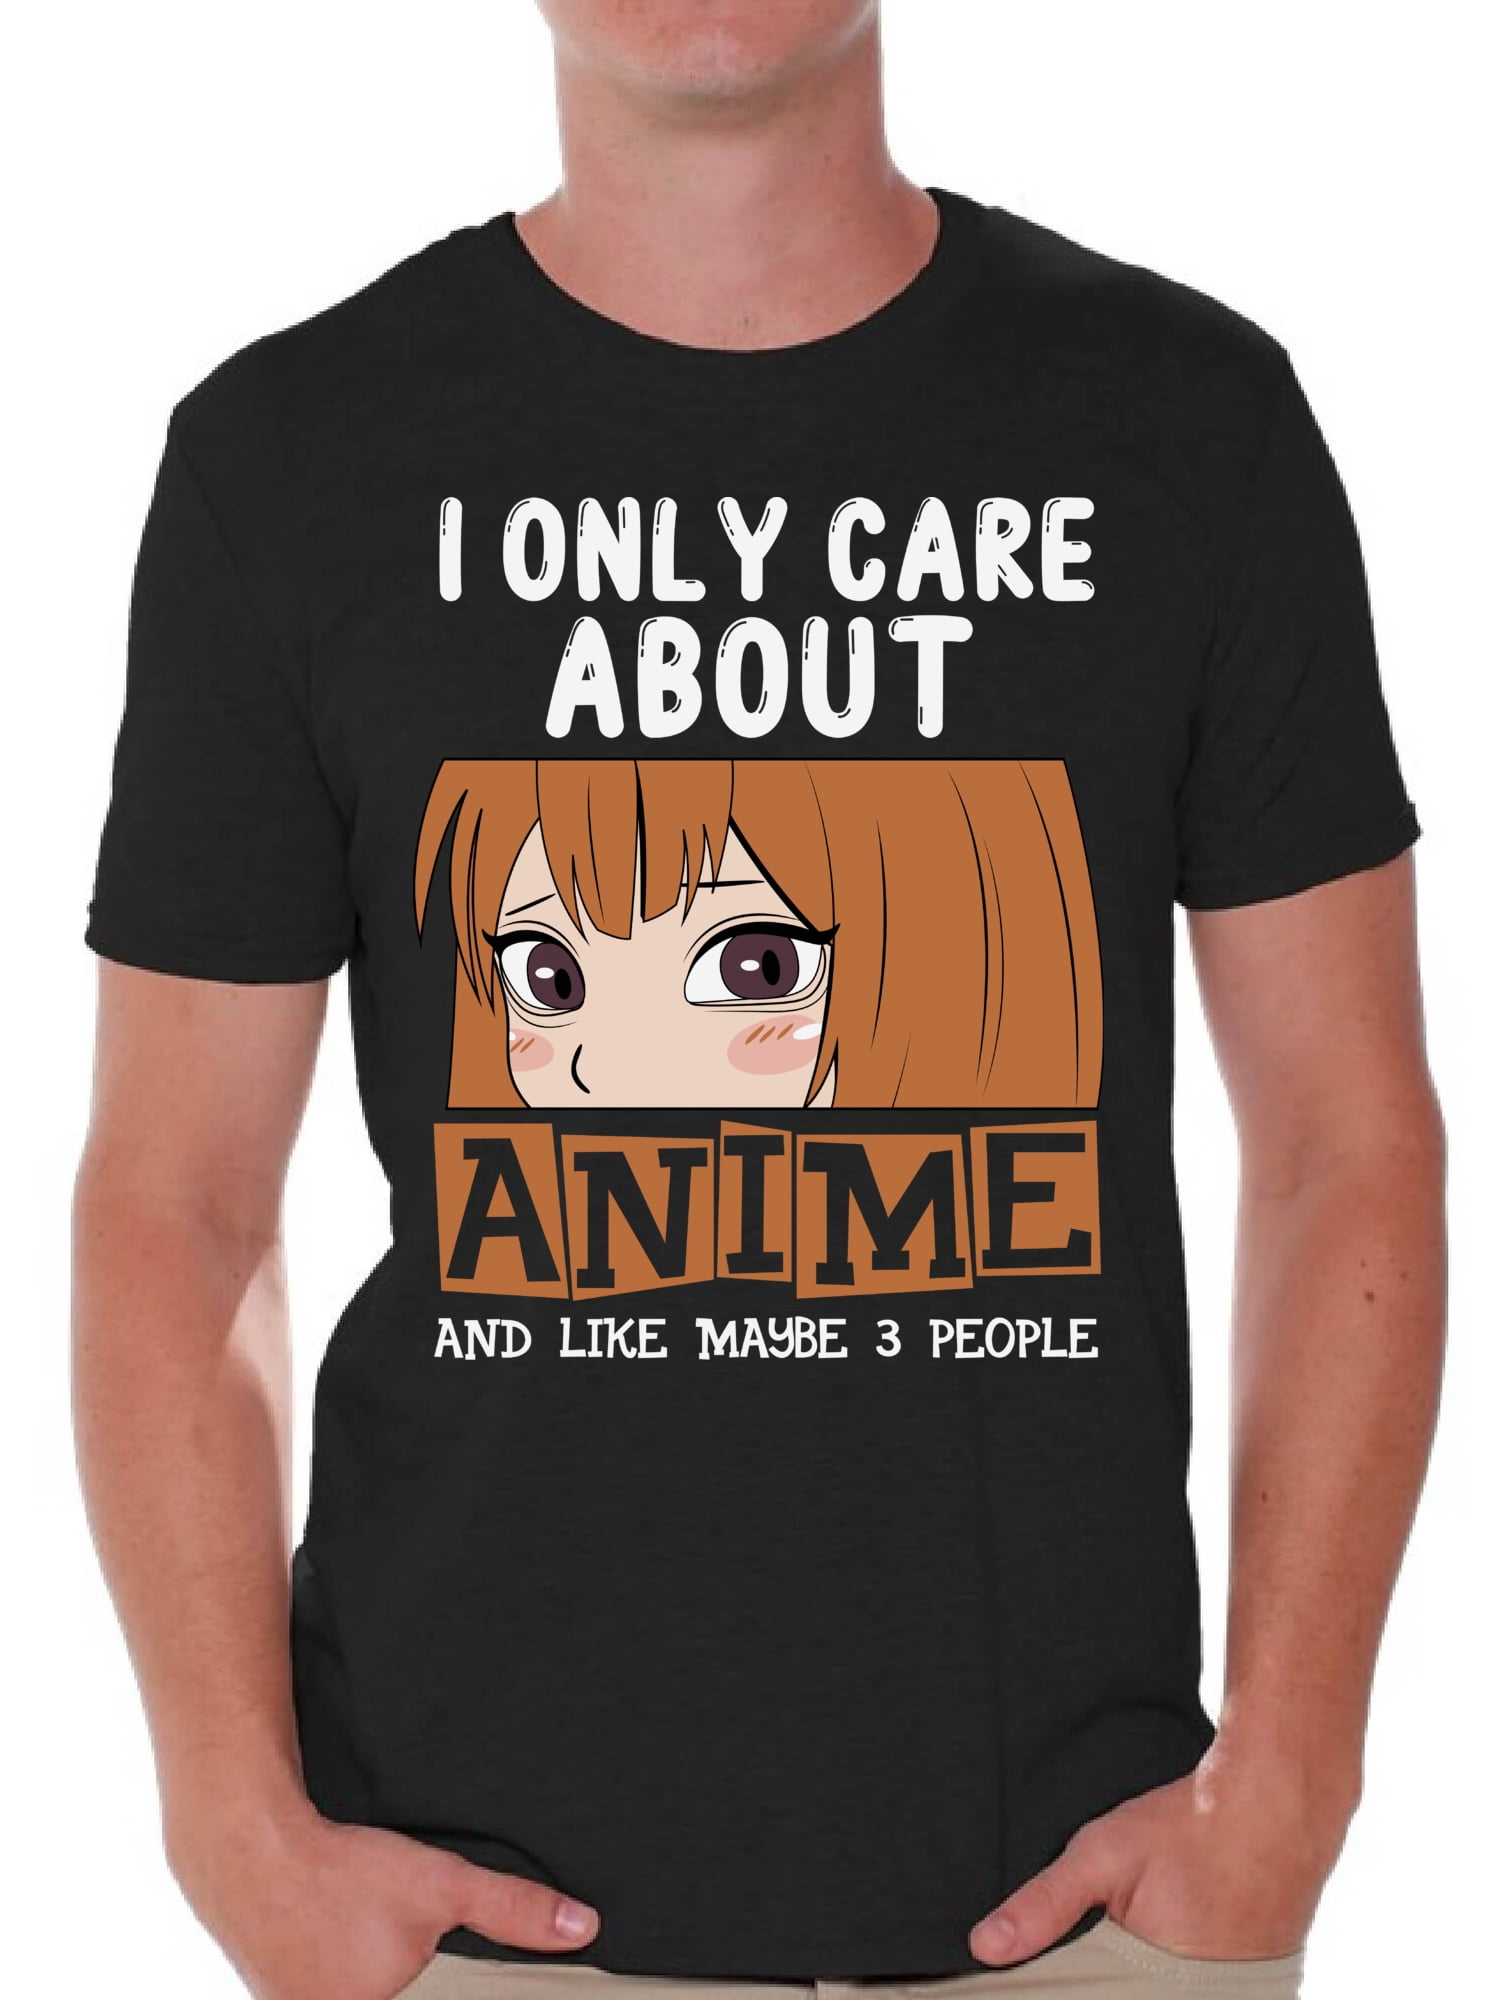 I Only Care About Anime T-Shirt for Men Anime Men's Tees Humor Shirt